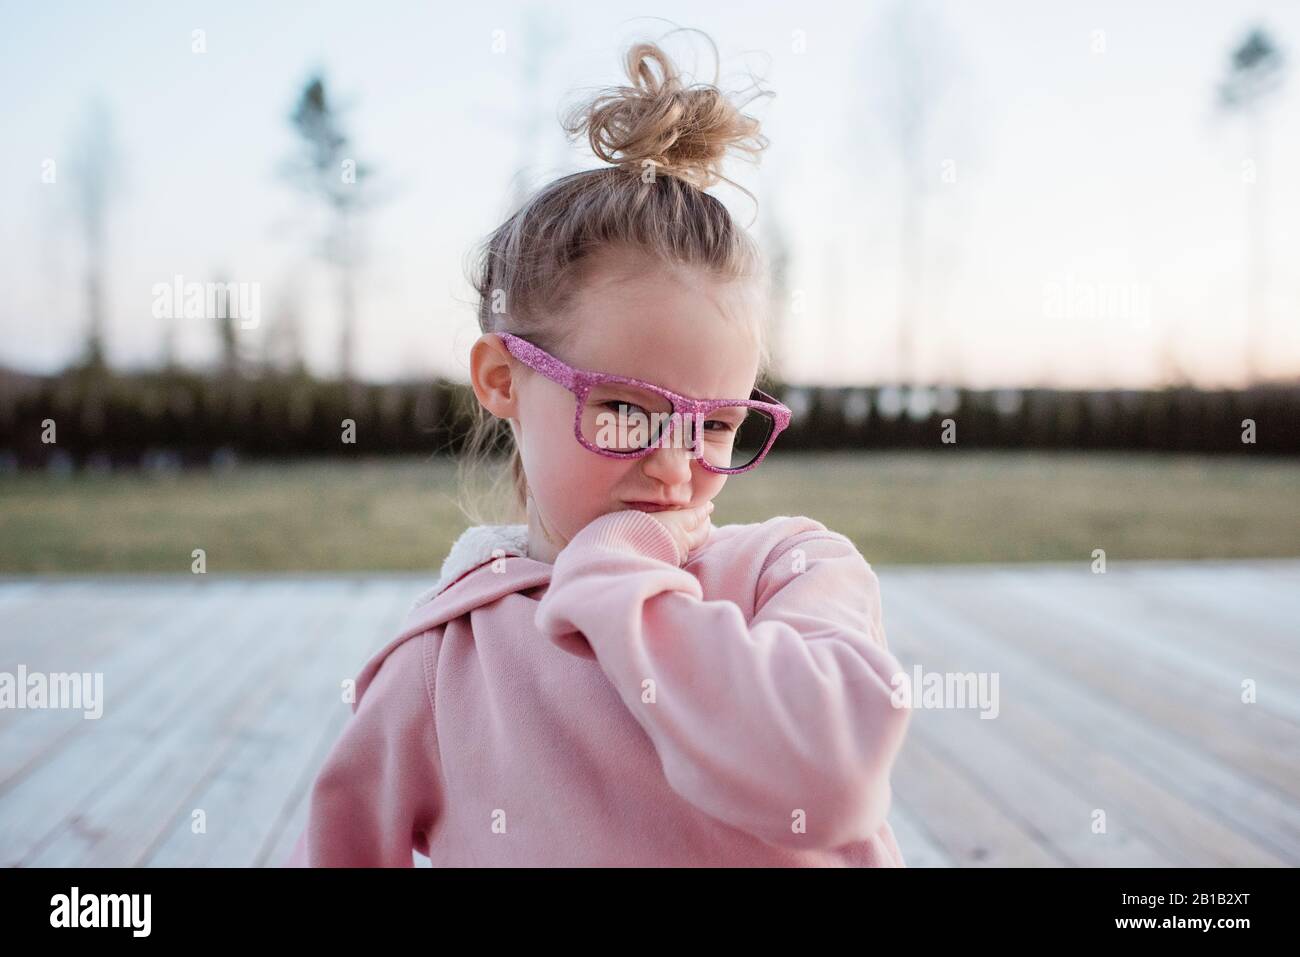 portrait of a young girl pulling funny faces with sparkly glasses on Stock Photo